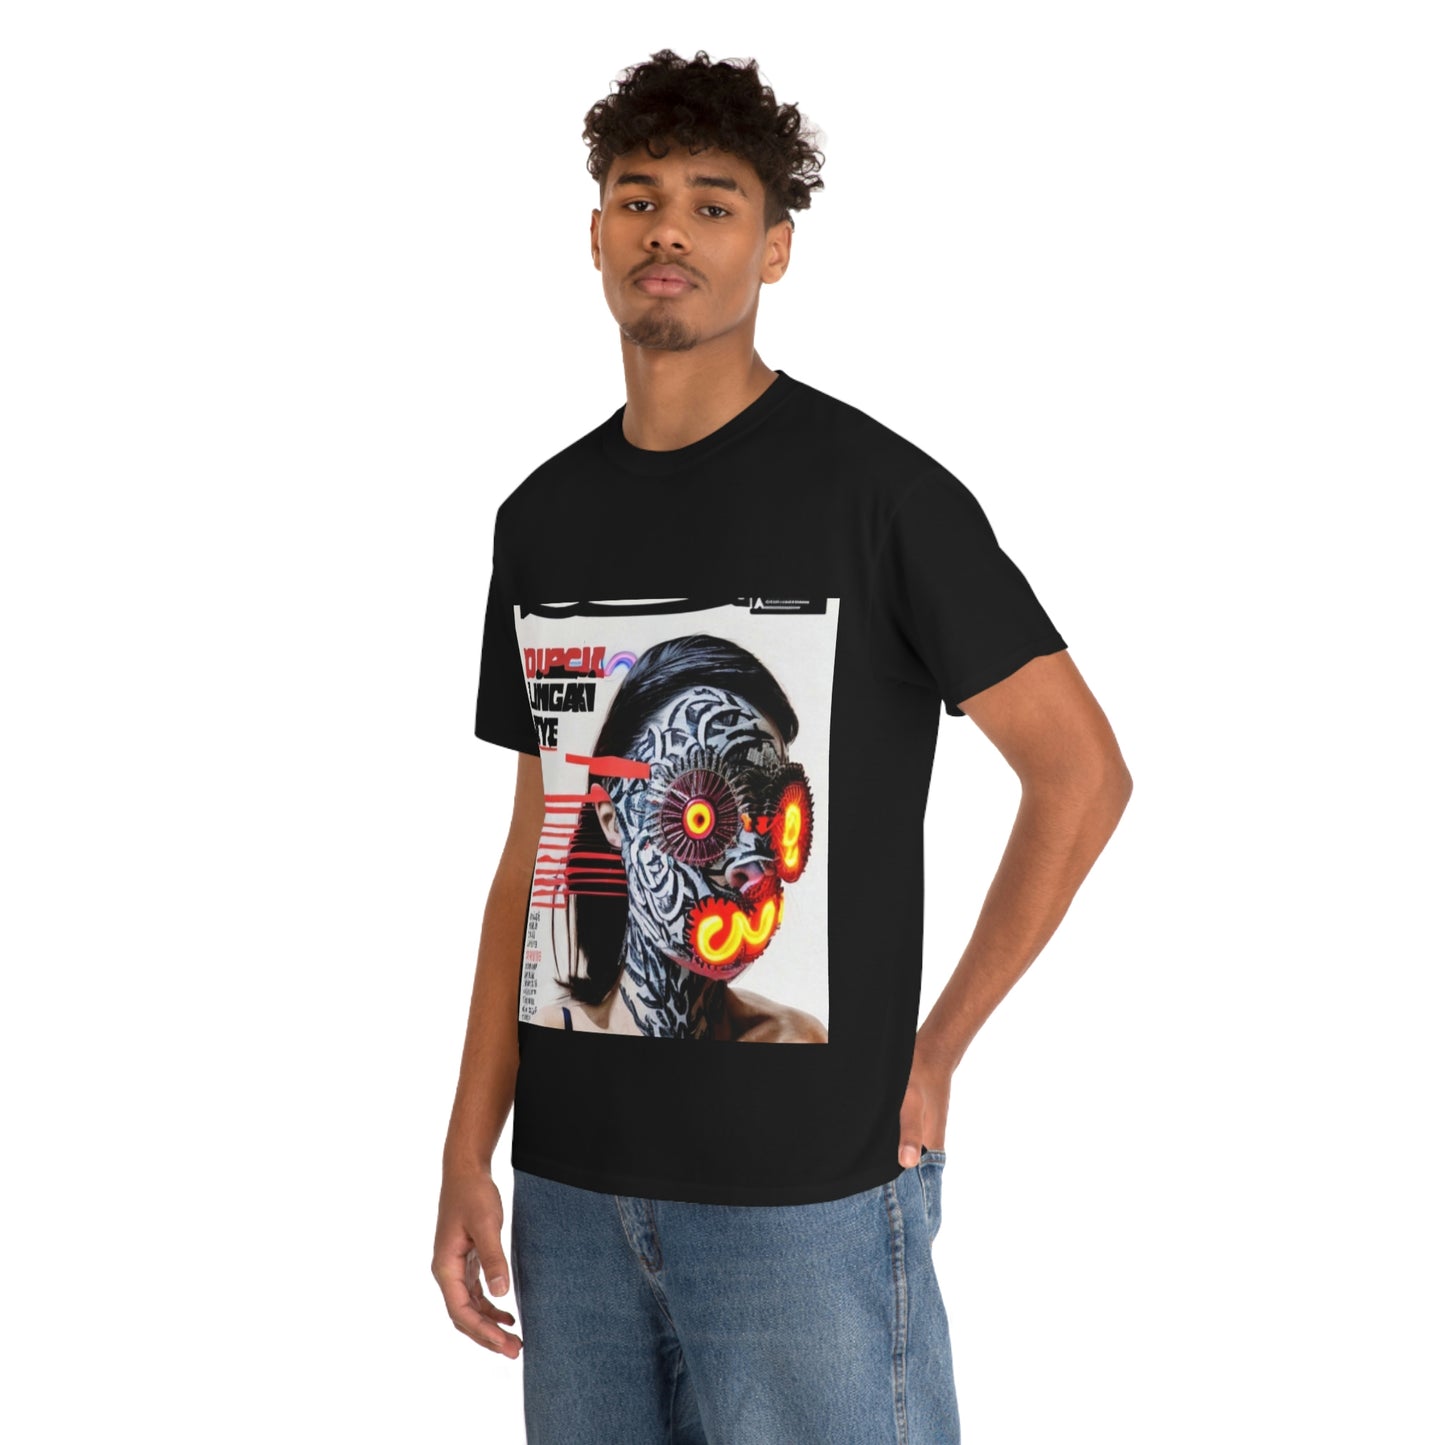 Lived Through - Indigenous Dystopian Warrior  T-Shirt Collection